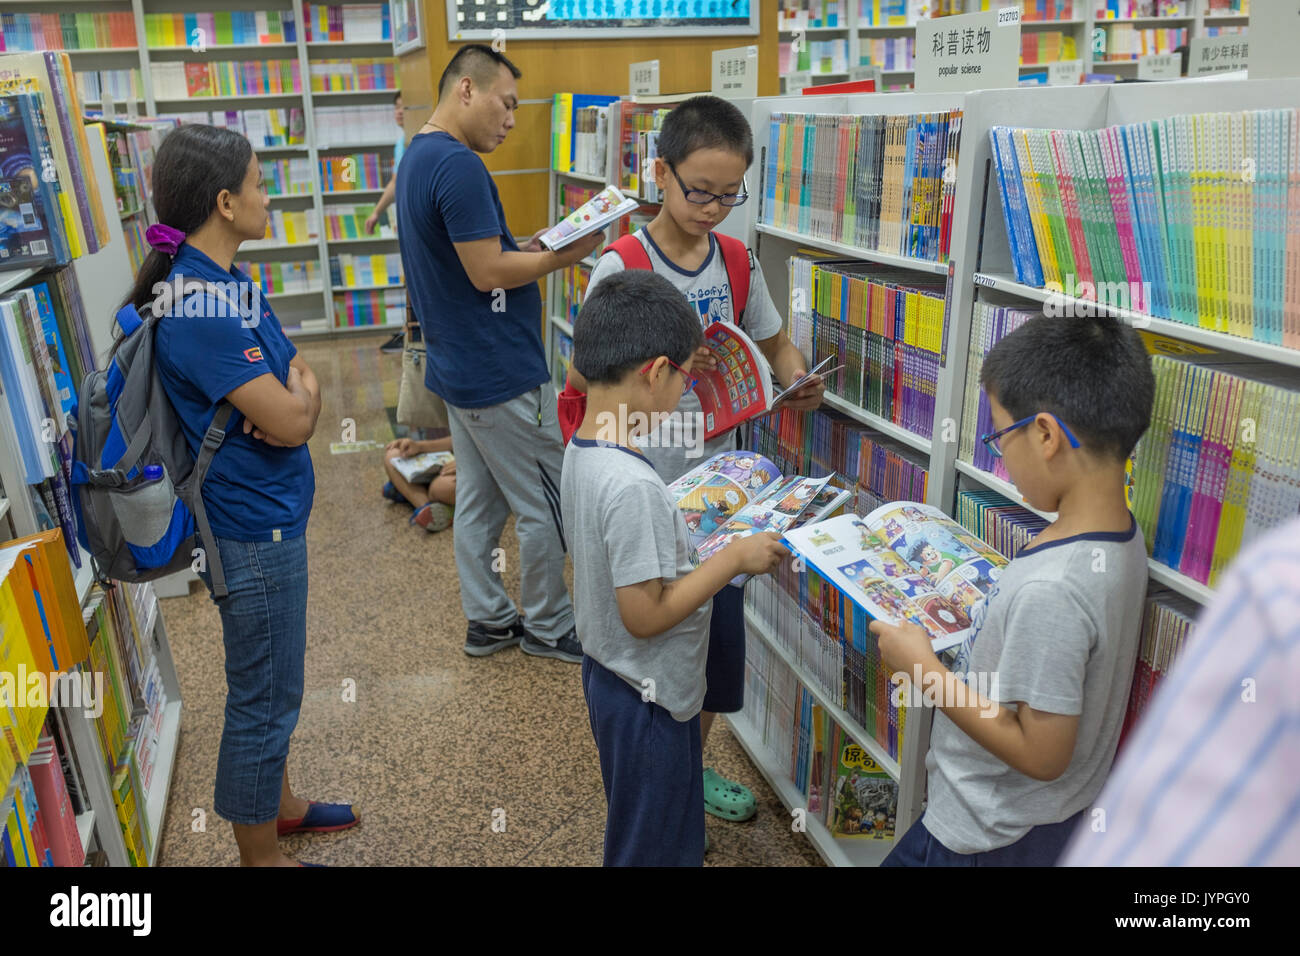 Children reading books inside a bookstore in Beijing, China. Stock Photo